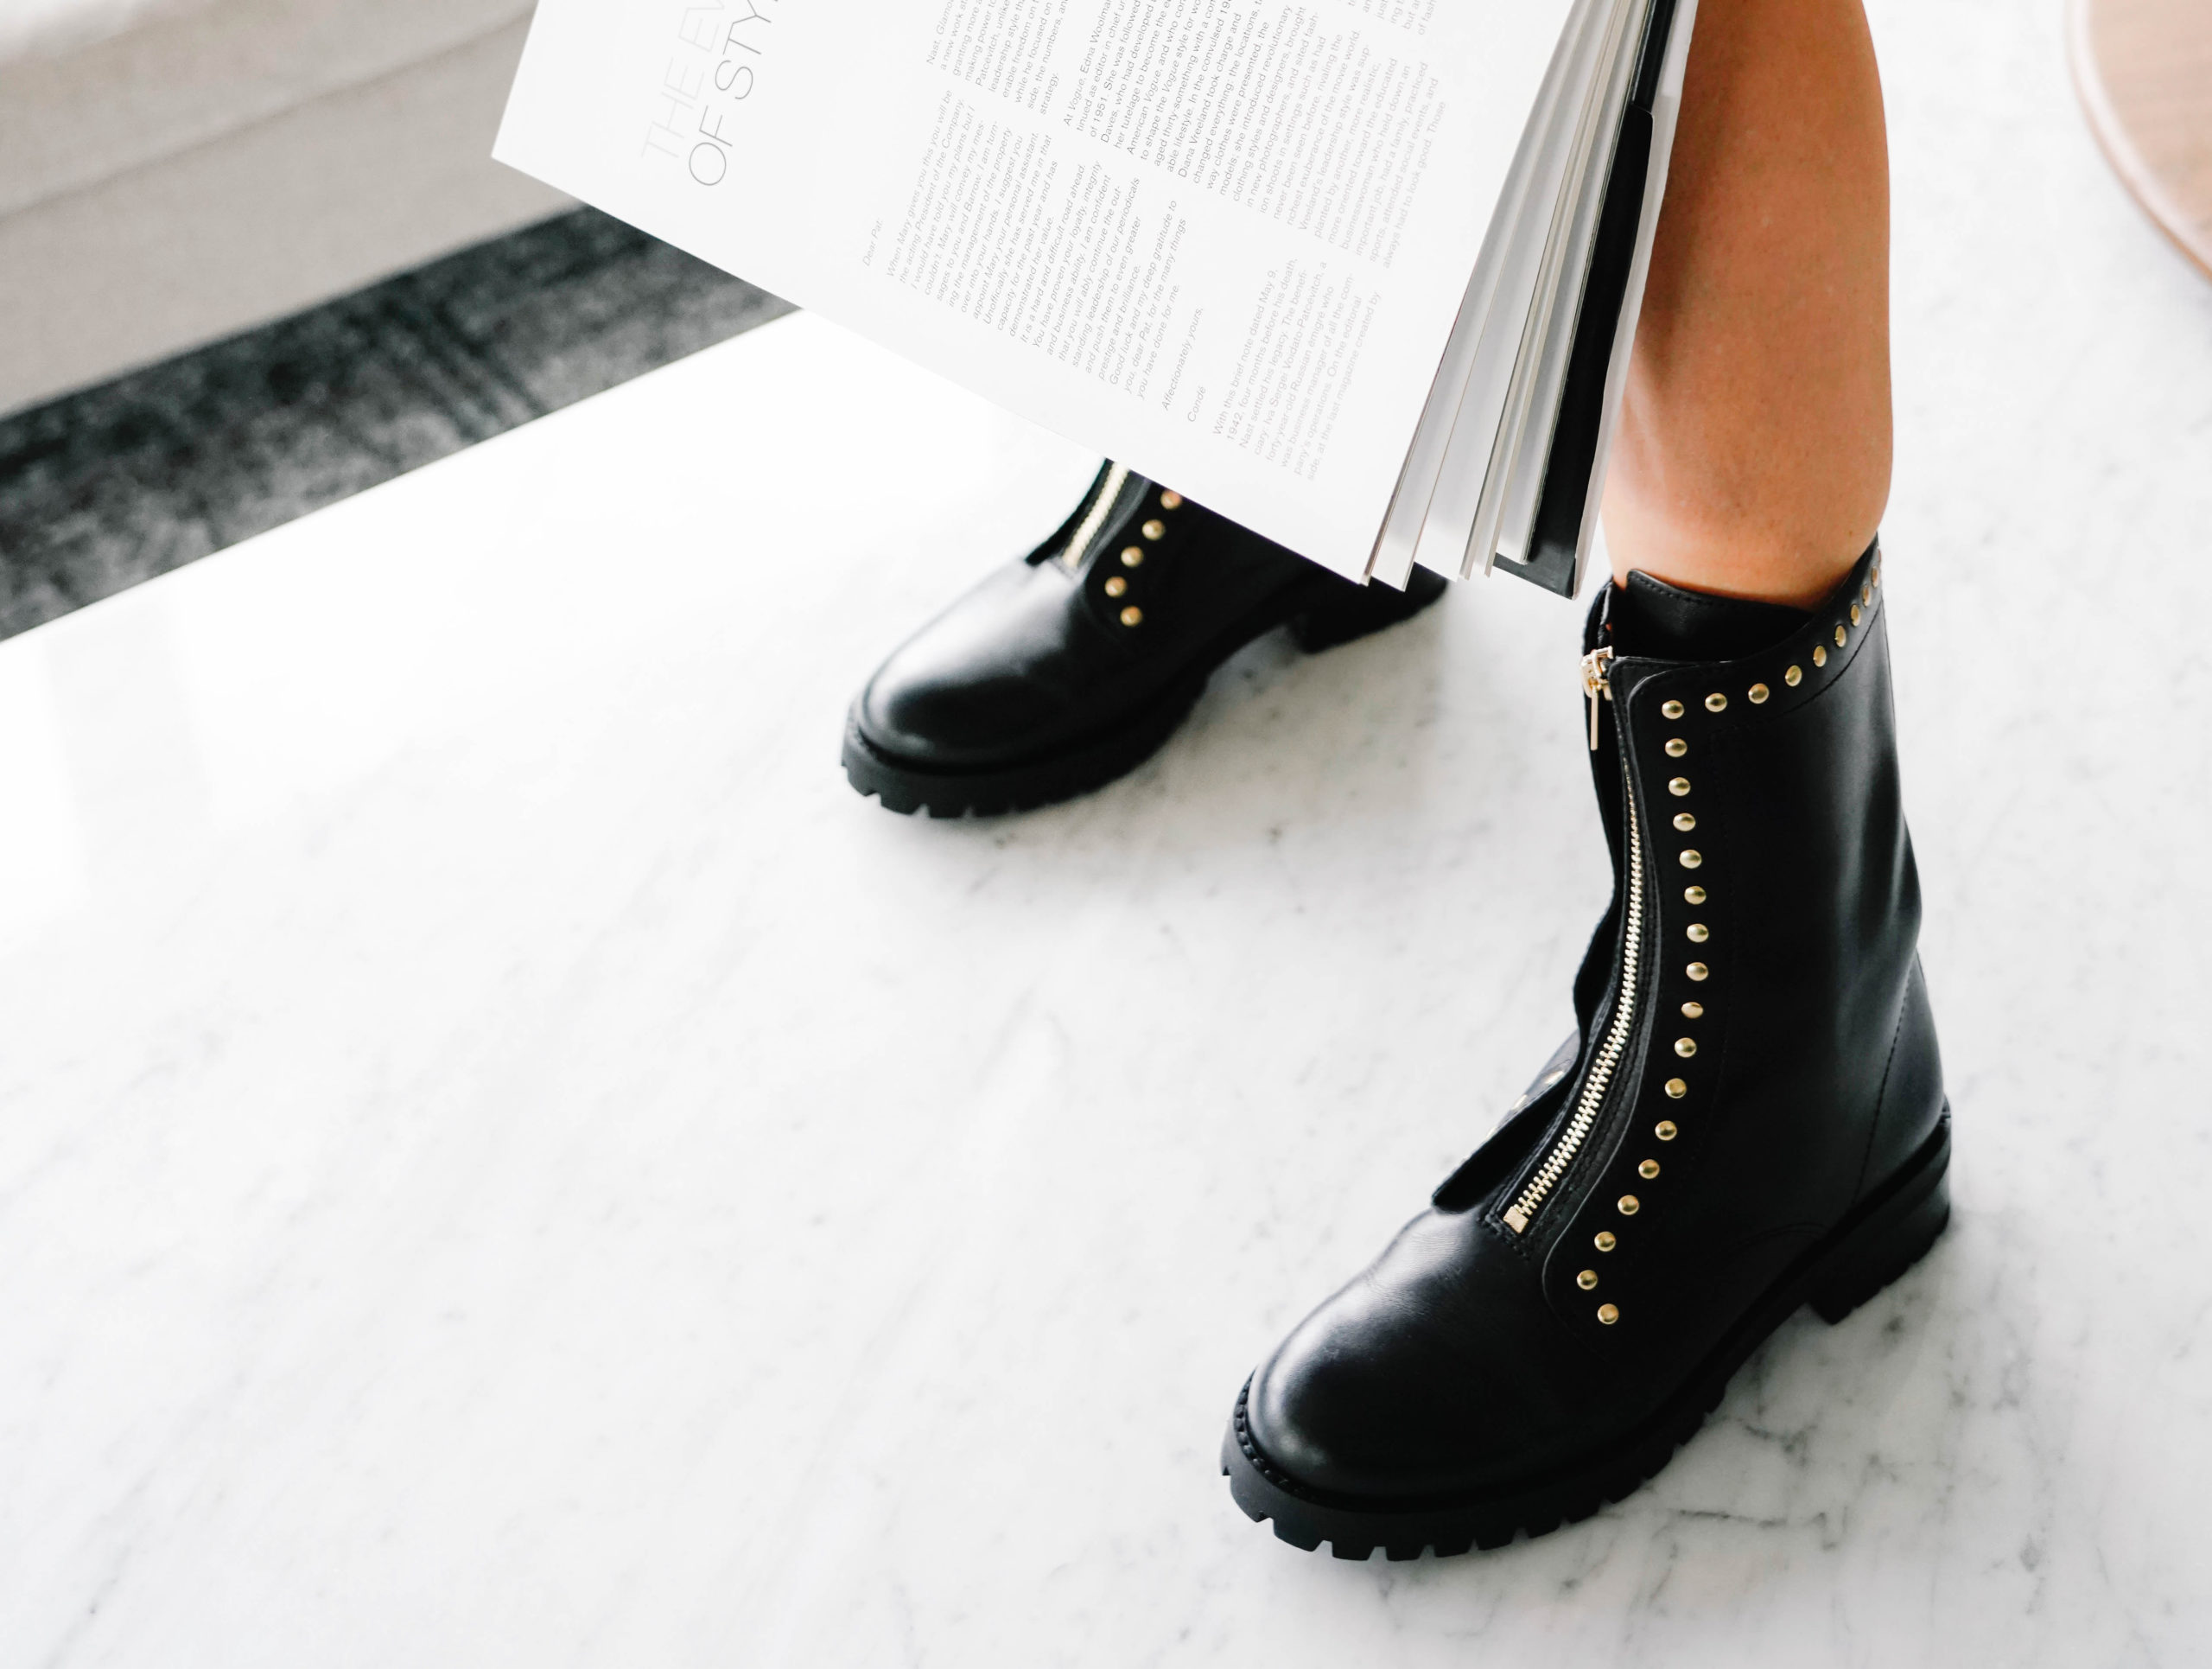 https://www.telavivcouture.com/wp-content/uploads/2021/01/COACH-STUDDED-COMBAT-BOOTS-scaled.jpg